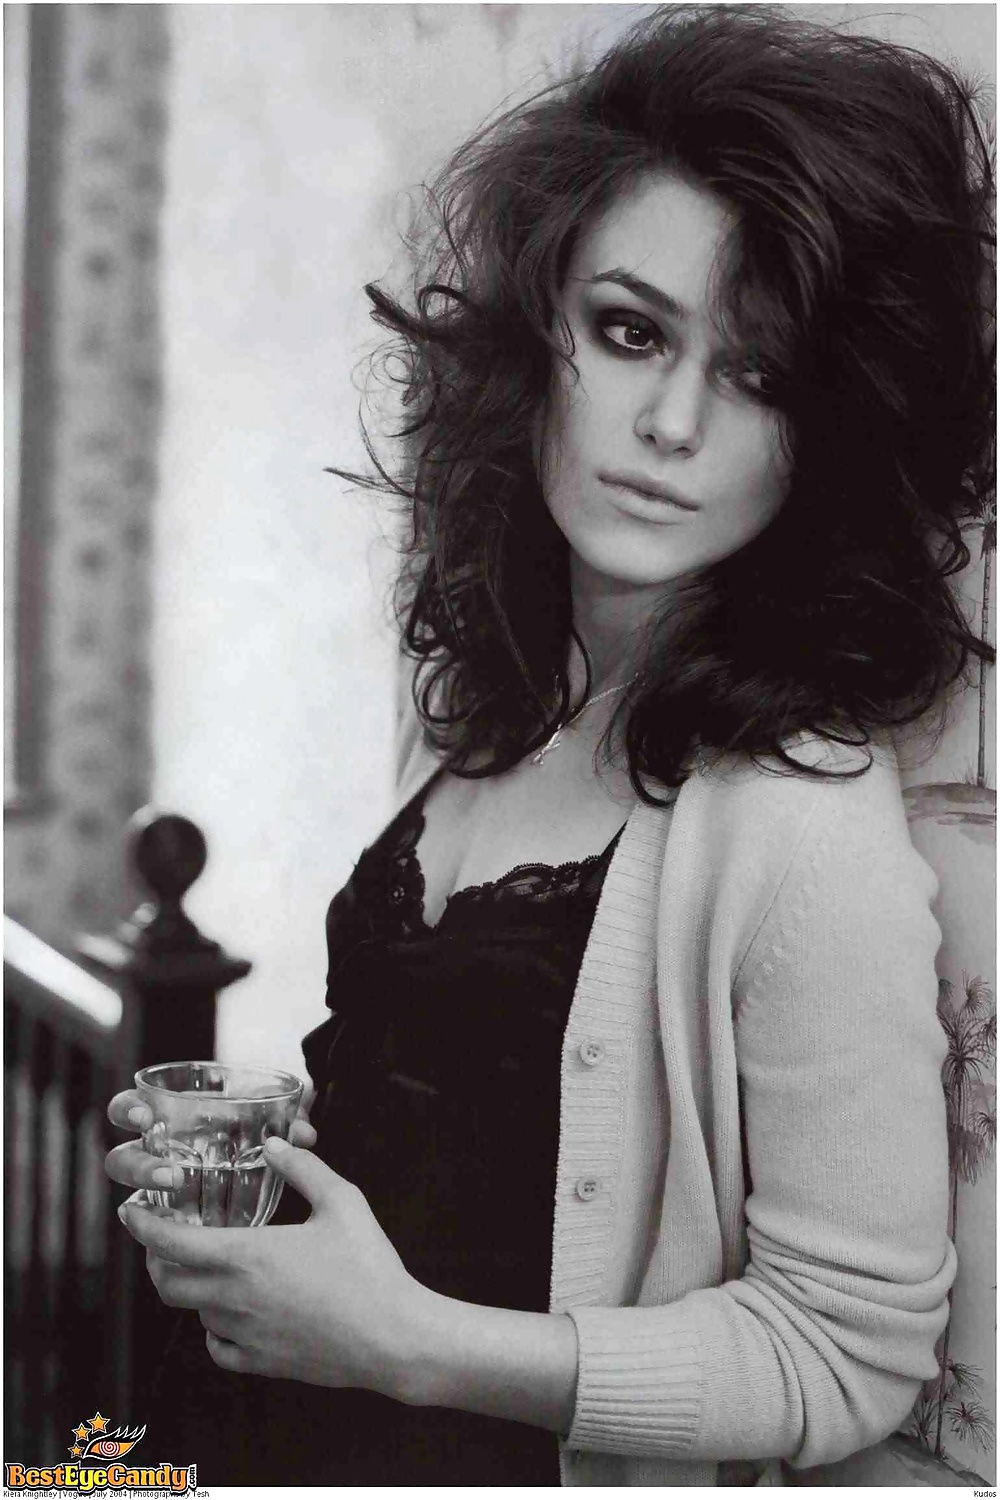 Keira Knightley The Royal Lady of England #35649628